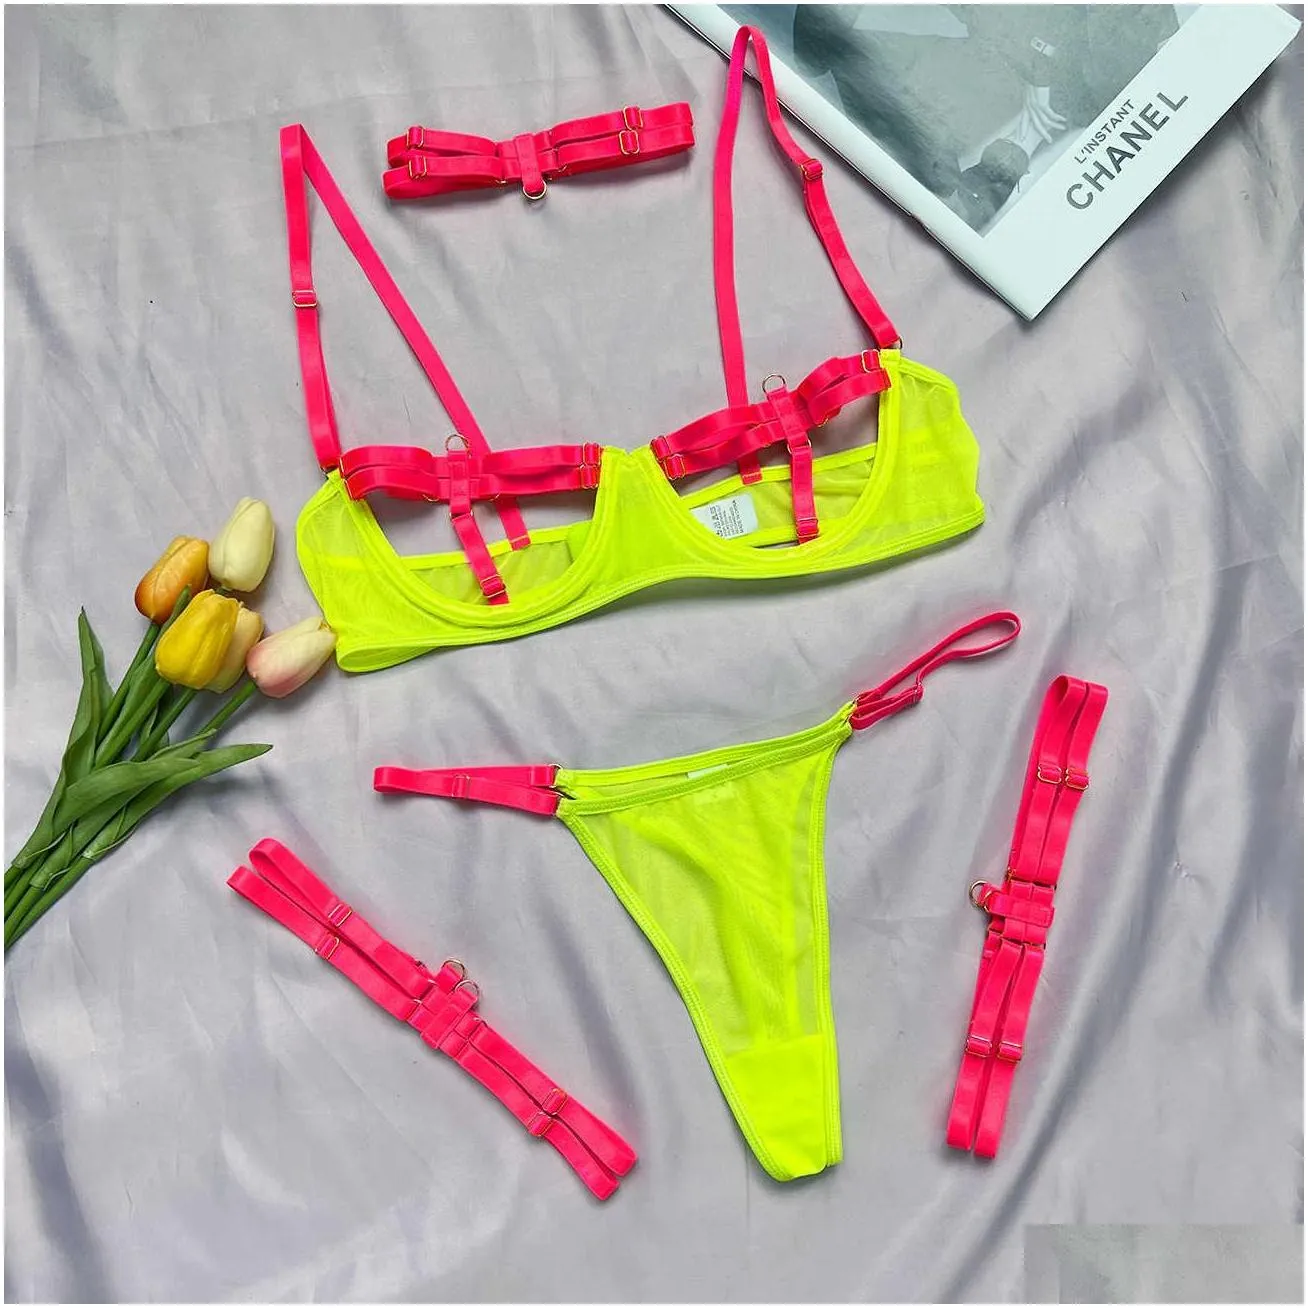 Other Home Textile Underwear Woman Sexi Open Cup Thongs Sensual Sexy Women  Whore Costume Briefs Intimate Gstring Lingerie Corset Tra Dhuoa From  Nerdsropebags500mg, $17.29